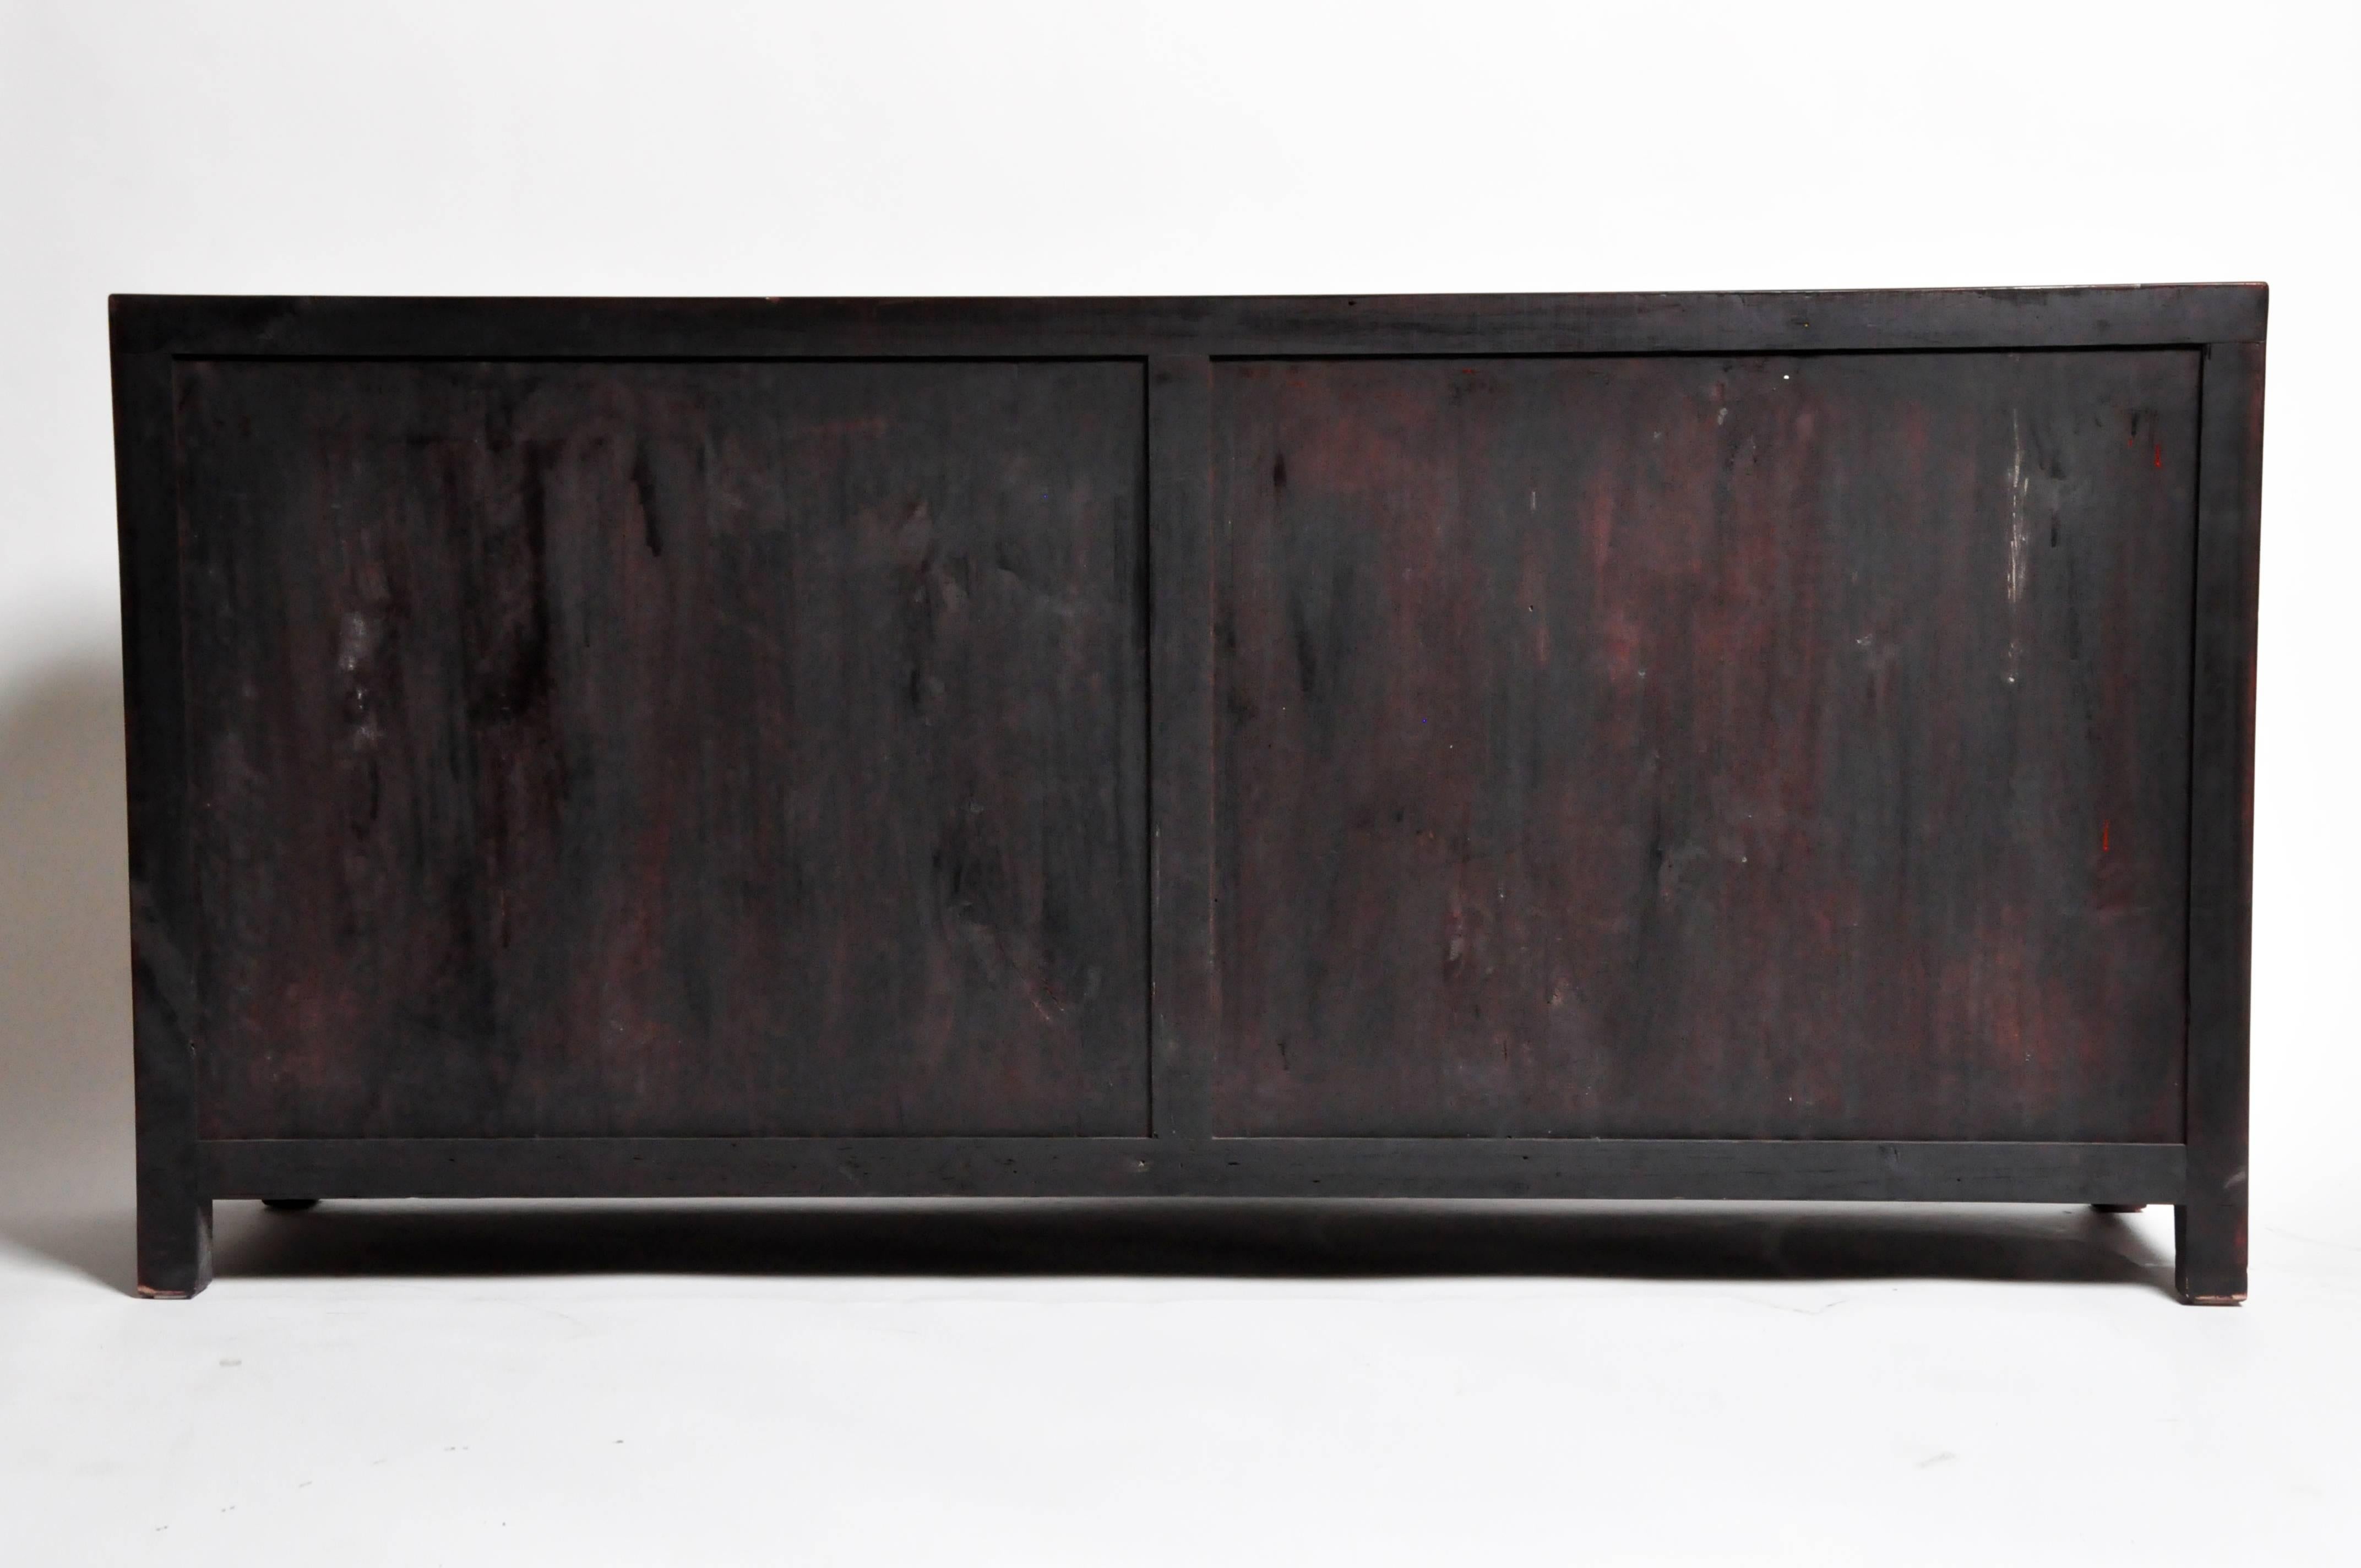 This sideboard is from Jiangsu, China and was made from reclaimed elm wood. The piece features mortise and tenon joinery, bi-folding doors, four drawers, and a shelves below for ample storage. You can also customize a new one and make it your own.